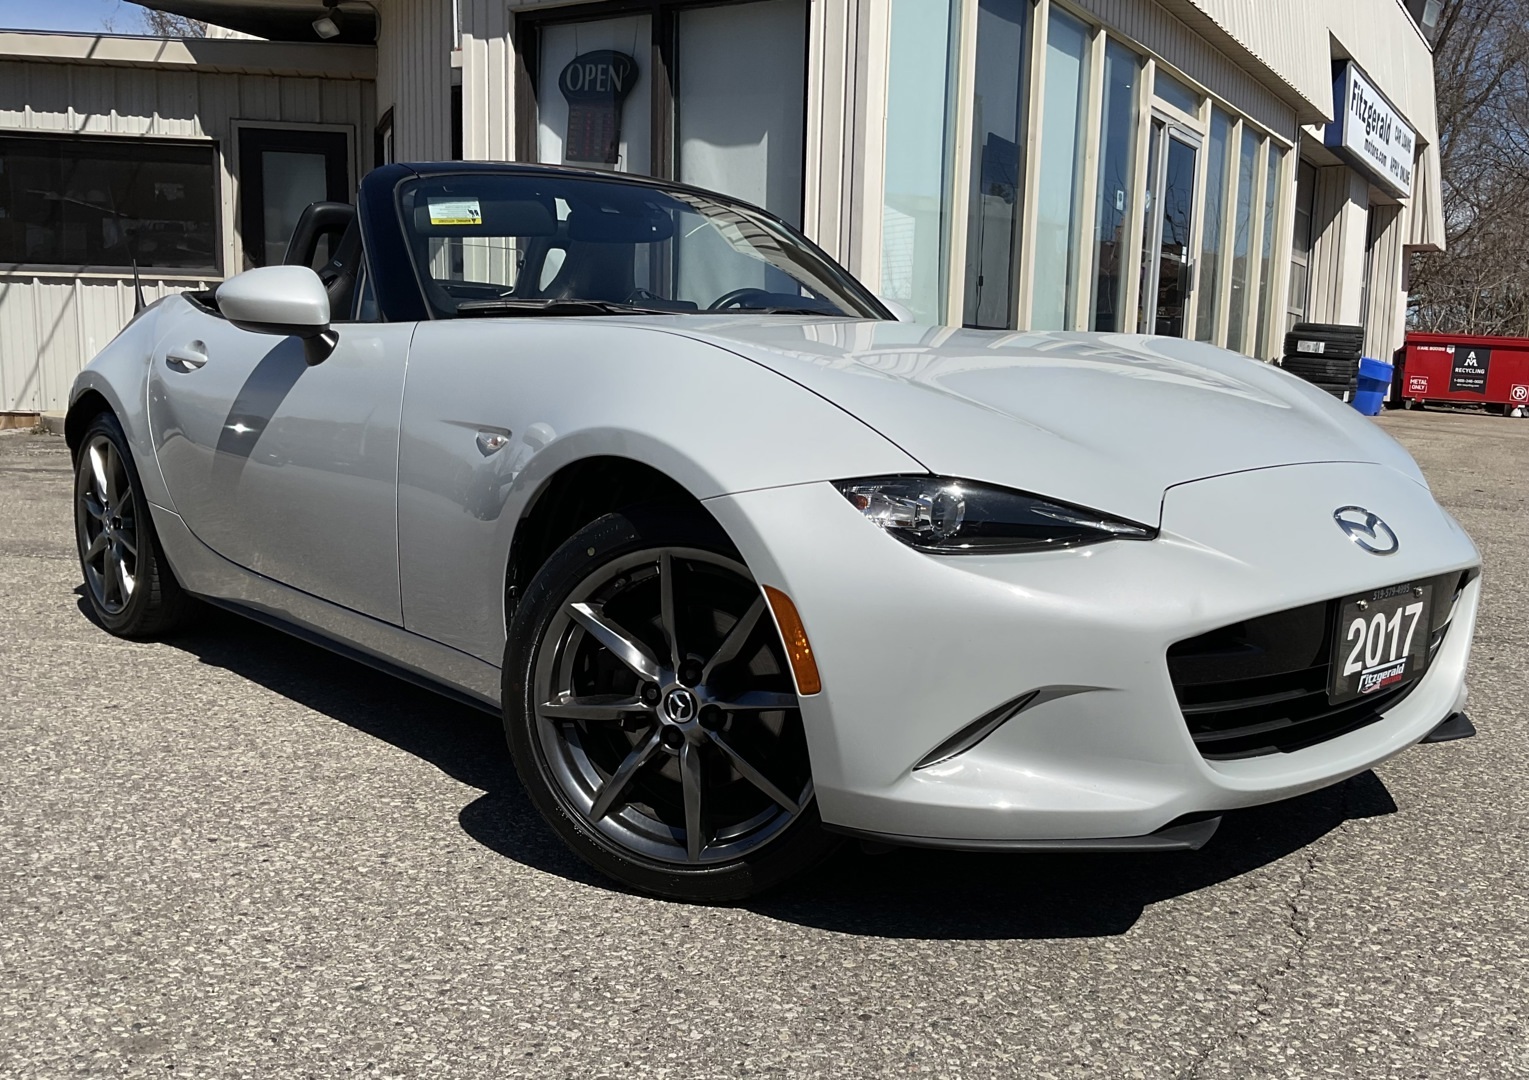 2017 Mazda MX-5 GT - 6 SPEED! LEATHER! NAV! HTD SEATS! CAR PLAY!